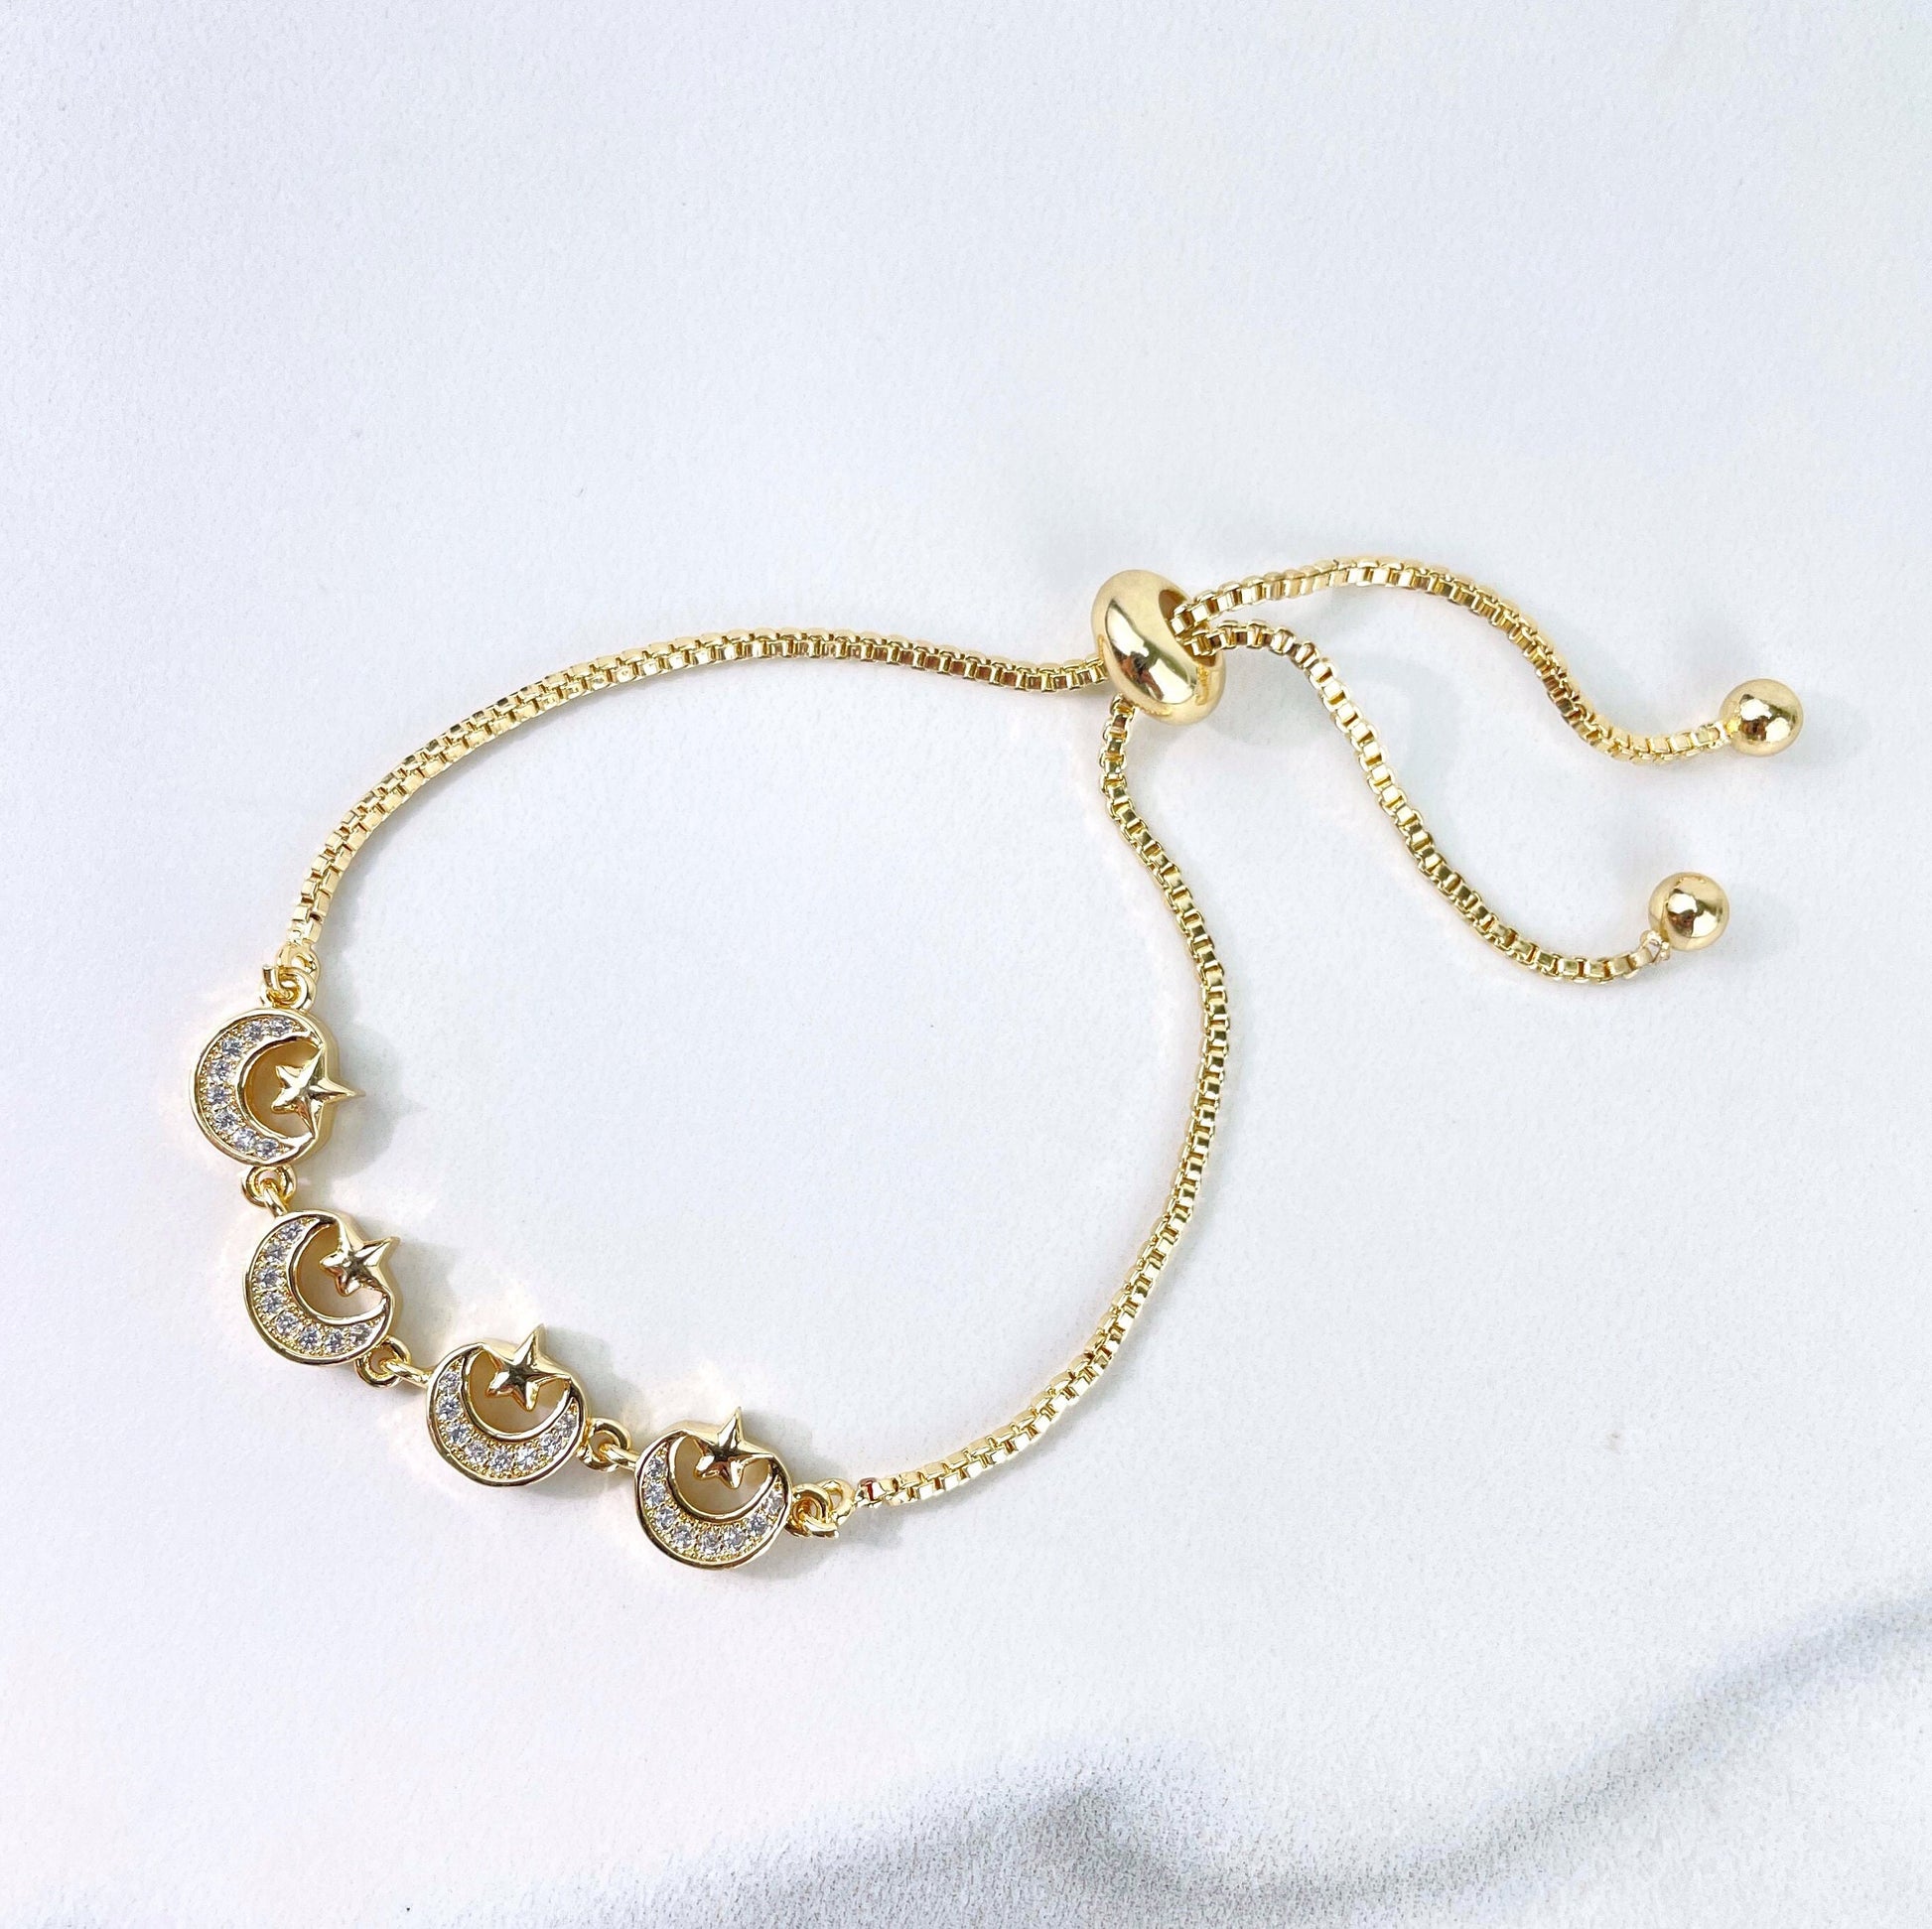 18k Gold Filled 1mm Box Chain, Micro Pave, Cubic Zirconia, Moon and Bright Star Charms, Adjustable Bracelet, Wholesale Jewelry Supplies